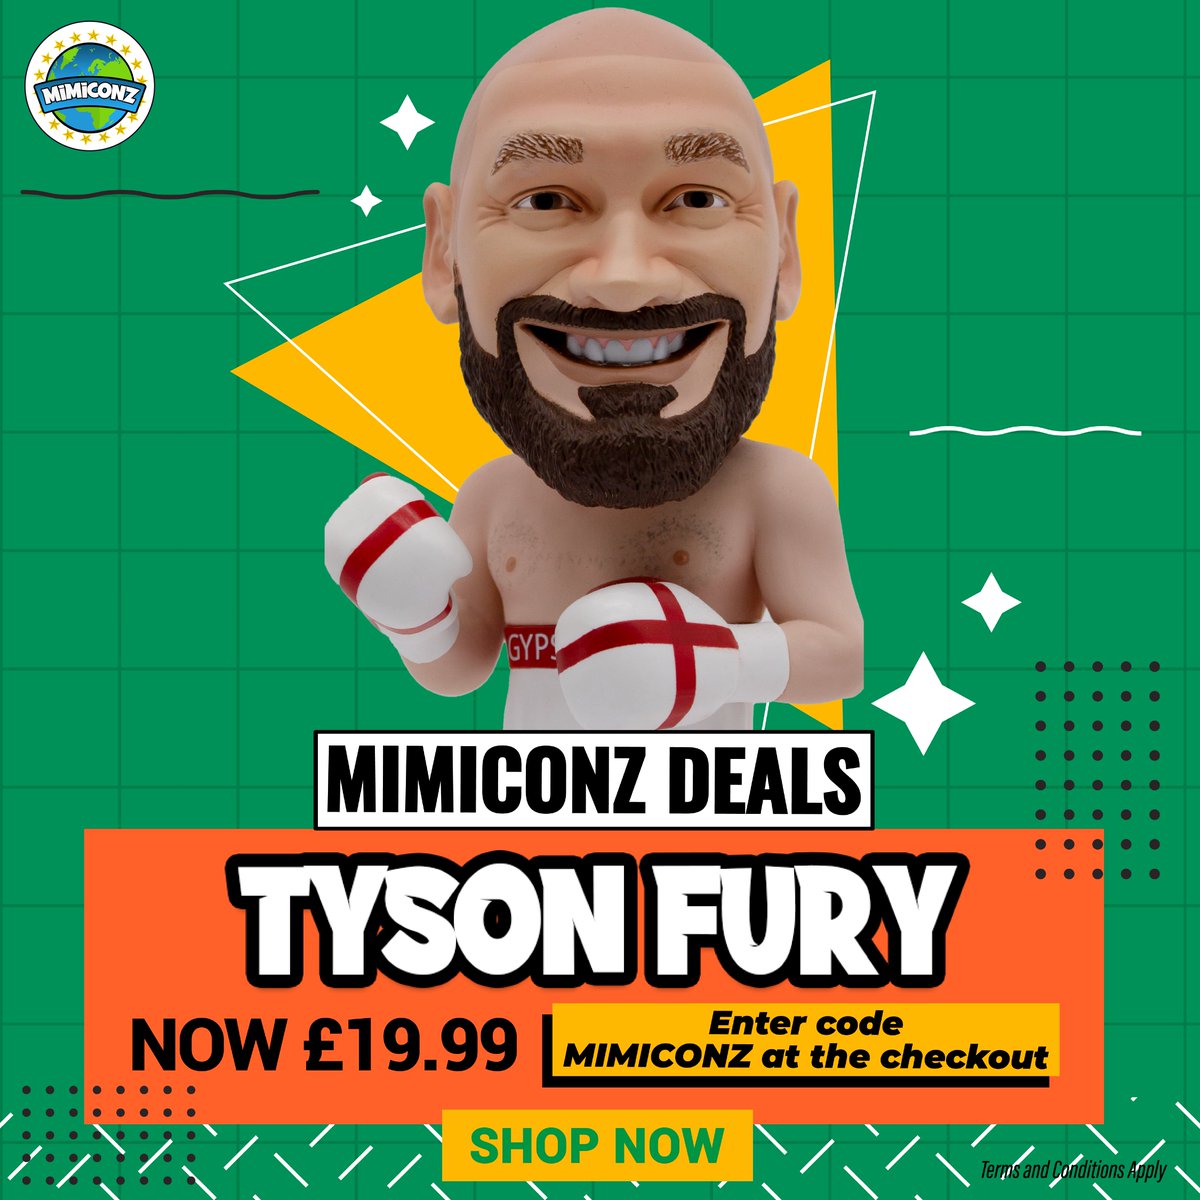 The Mimiconz mega-sale is here! 🤩
 
Save 20% on Sports Starz, Business Iconz and World Leaderz when you use code ‘MIMICONZ' at checkout 🛒
 
Shop the sitewide sale today!
 
#Mimiconz #TysonFury #NoveltyGifts